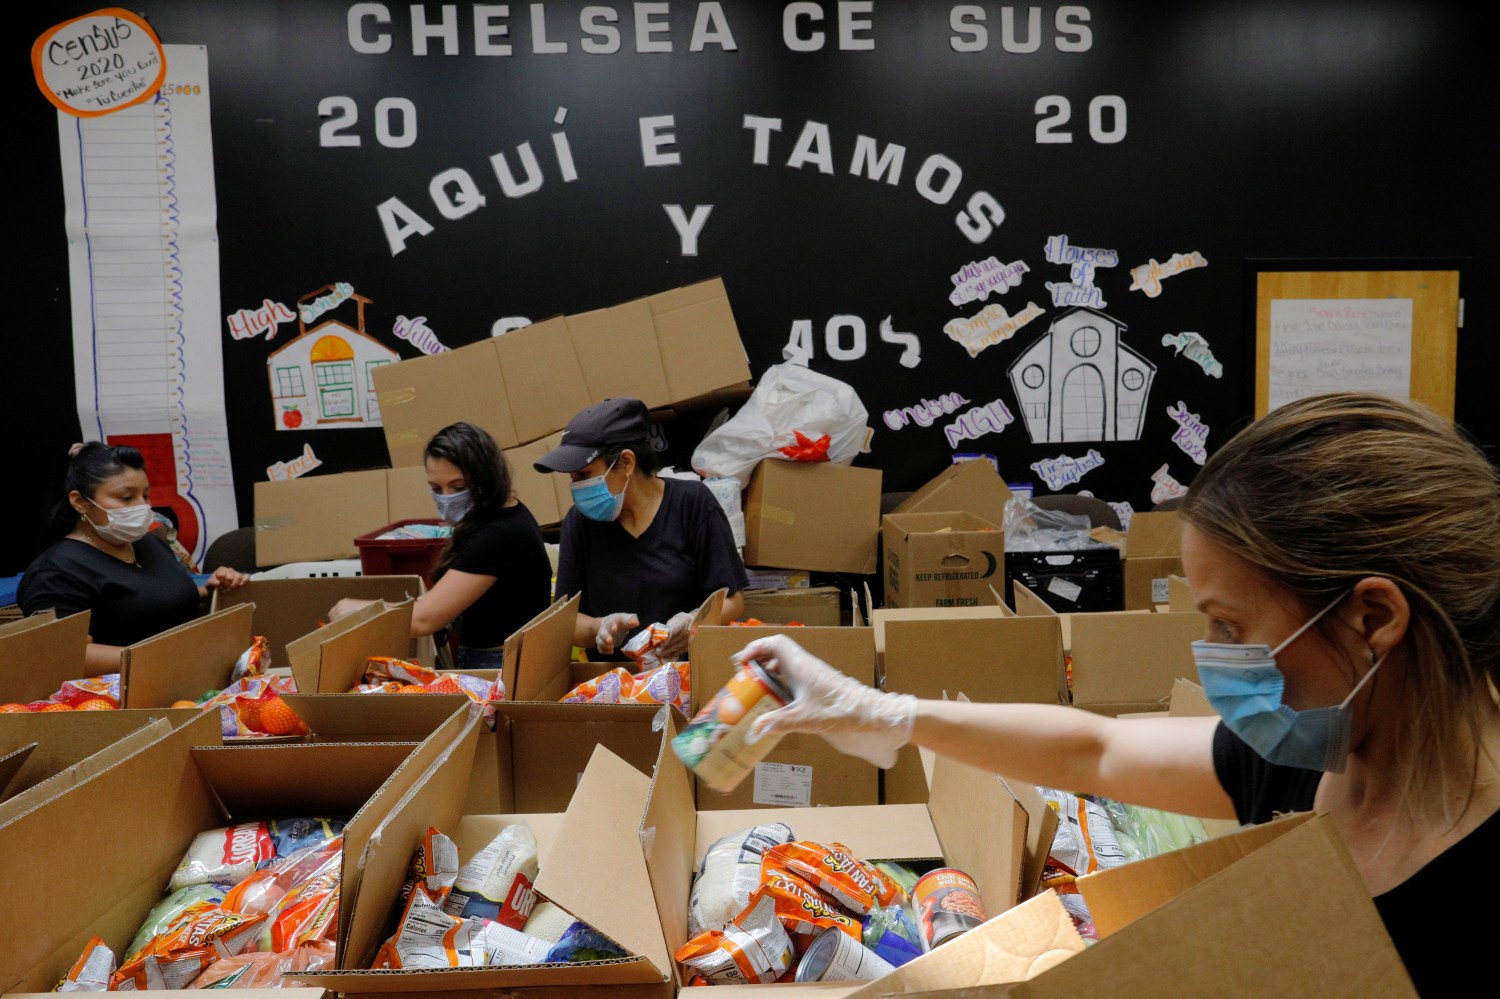 Workers prepare boxes of free food for distribution at the Chelsea Collaborative, which distributes 6 to 7 thousand of boxes of food a week in a city hard hit by the coronavirus disease (COVID-19) outbreak, in Chelsea, Massachusetts, U.S., July 9, 2020.   REUTERS/Brian Snyder